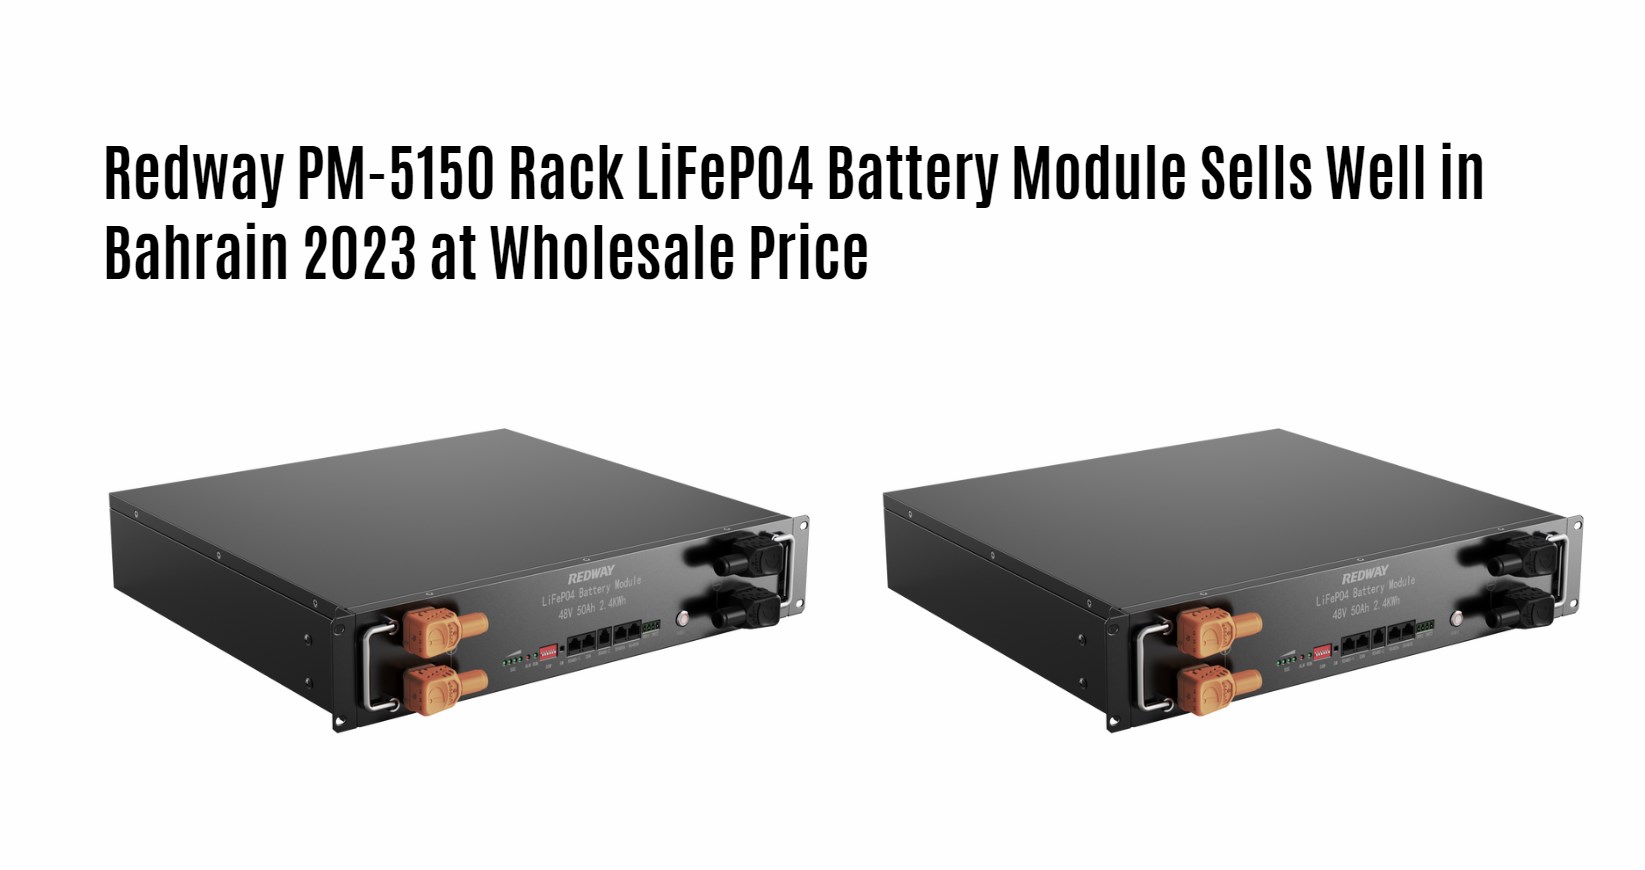 Redway PM-5150 Rack LiFePO4 Battery Module Sells Well in Bahrain 2023 at Wholesale Price. 51.2v 50ah server rack battery factory manufacturer oem 48v 50ah snmp